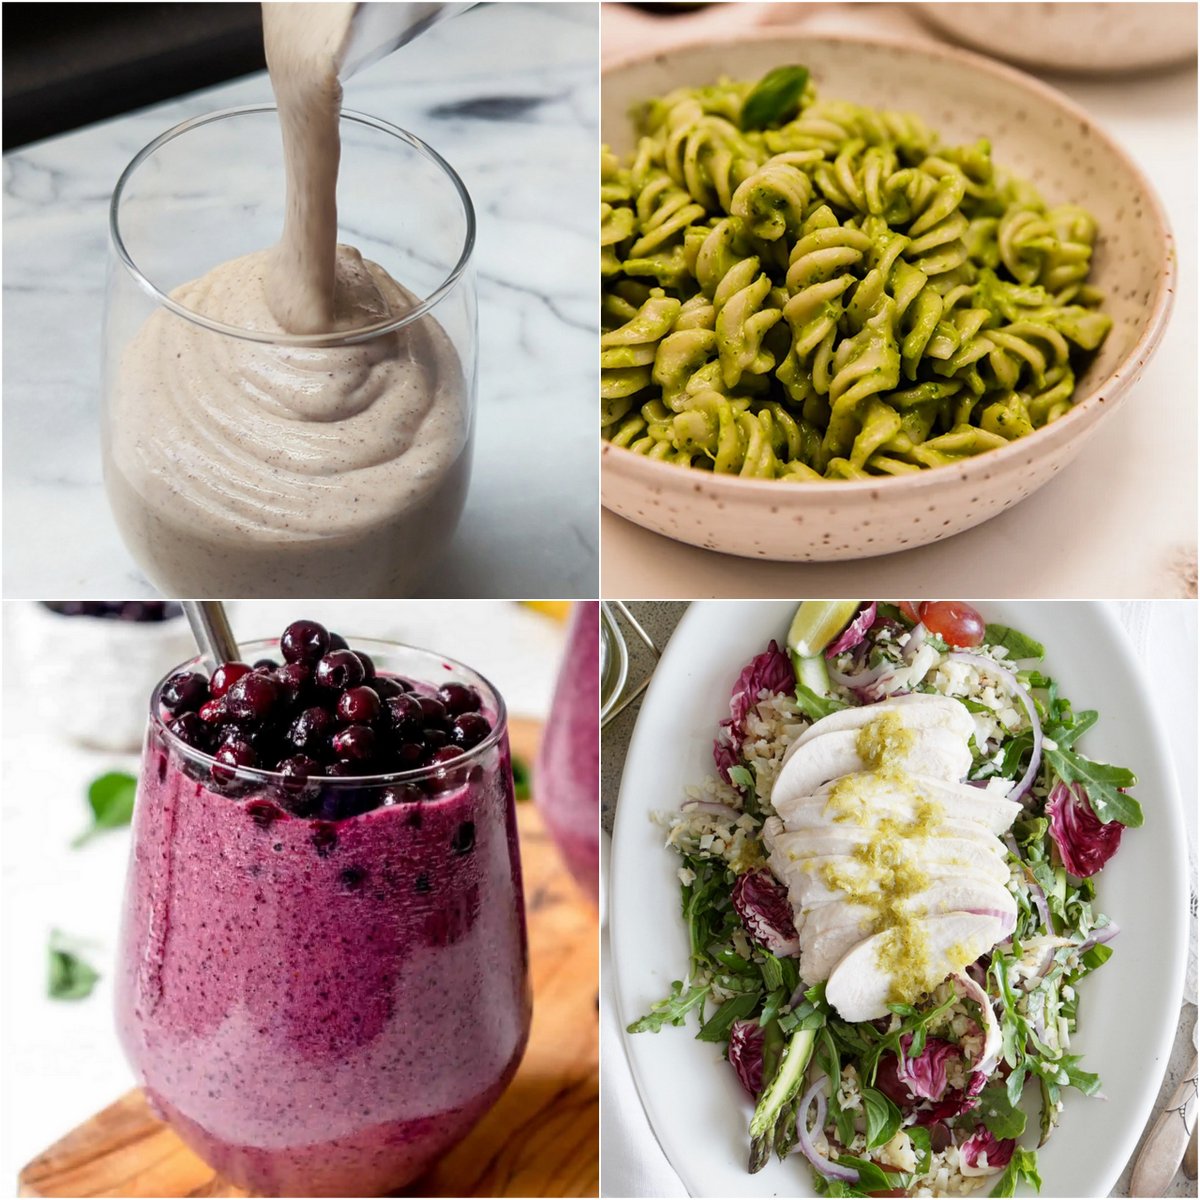 Paleo AIP Recipe Roundtable #409 | Phoenix Helix - *Featured Recipes: Cookies & Cream Milkshake, Easy Avocado Pasta Salad, Wild Blueberry Beet Smoothie, and Broth-poached Chicken with Summer Tabbouleh.